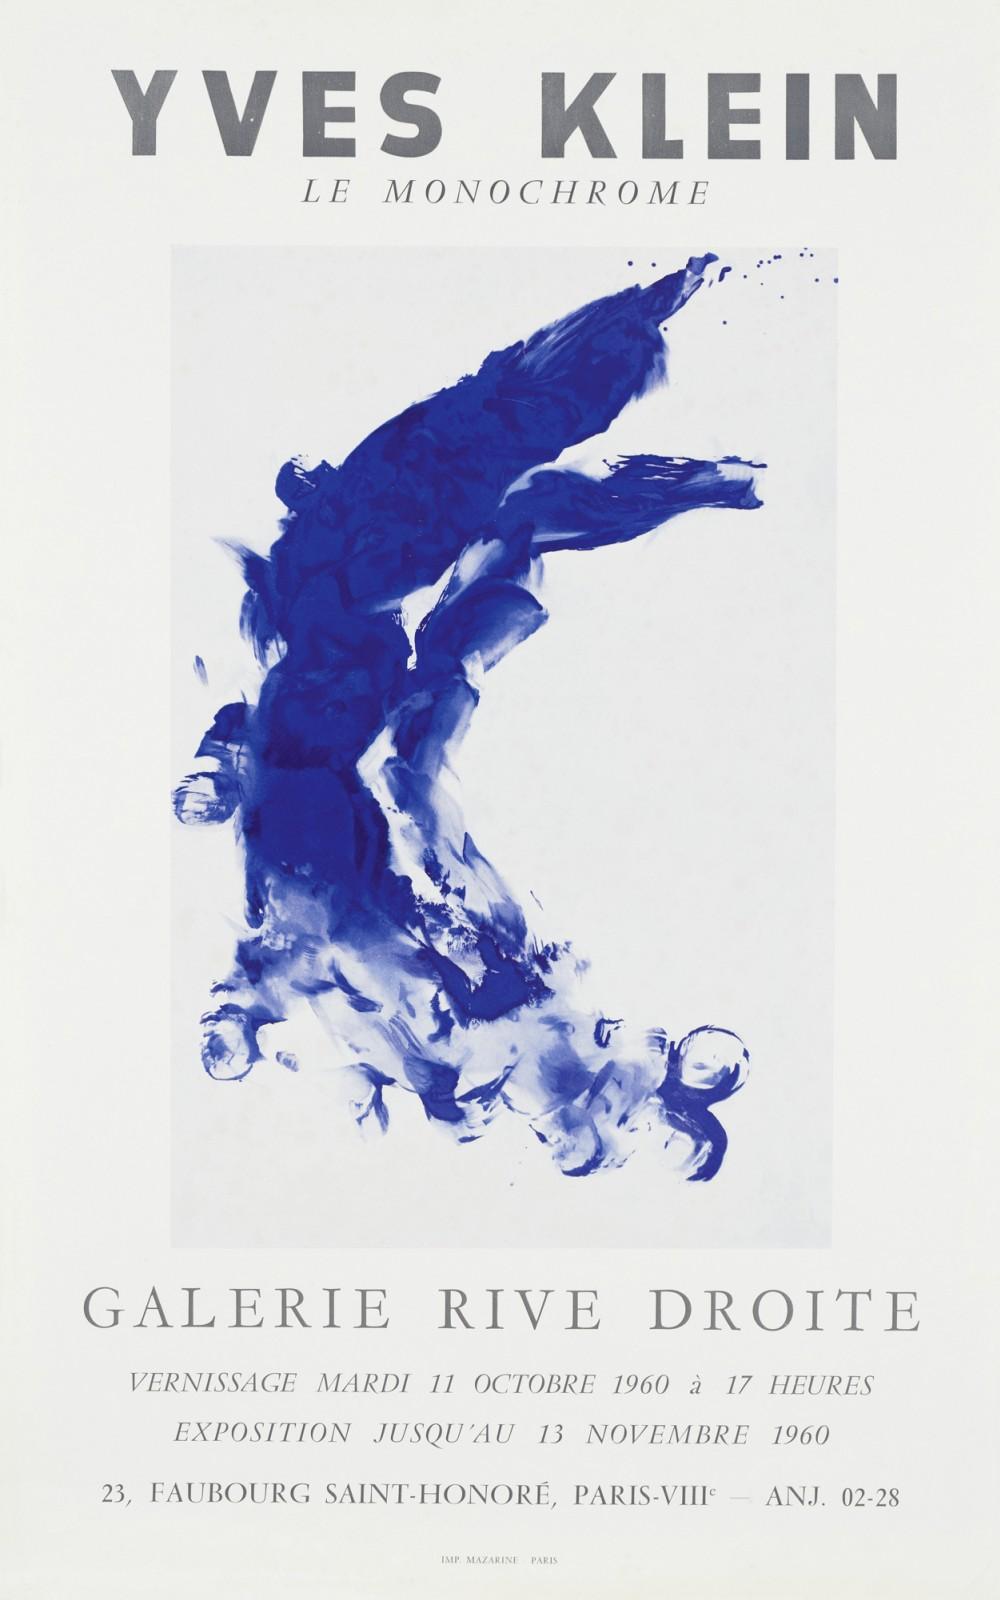 Poster for the exhibition "Yves Klein - Le Monochrome" at Galerie Rive Droite